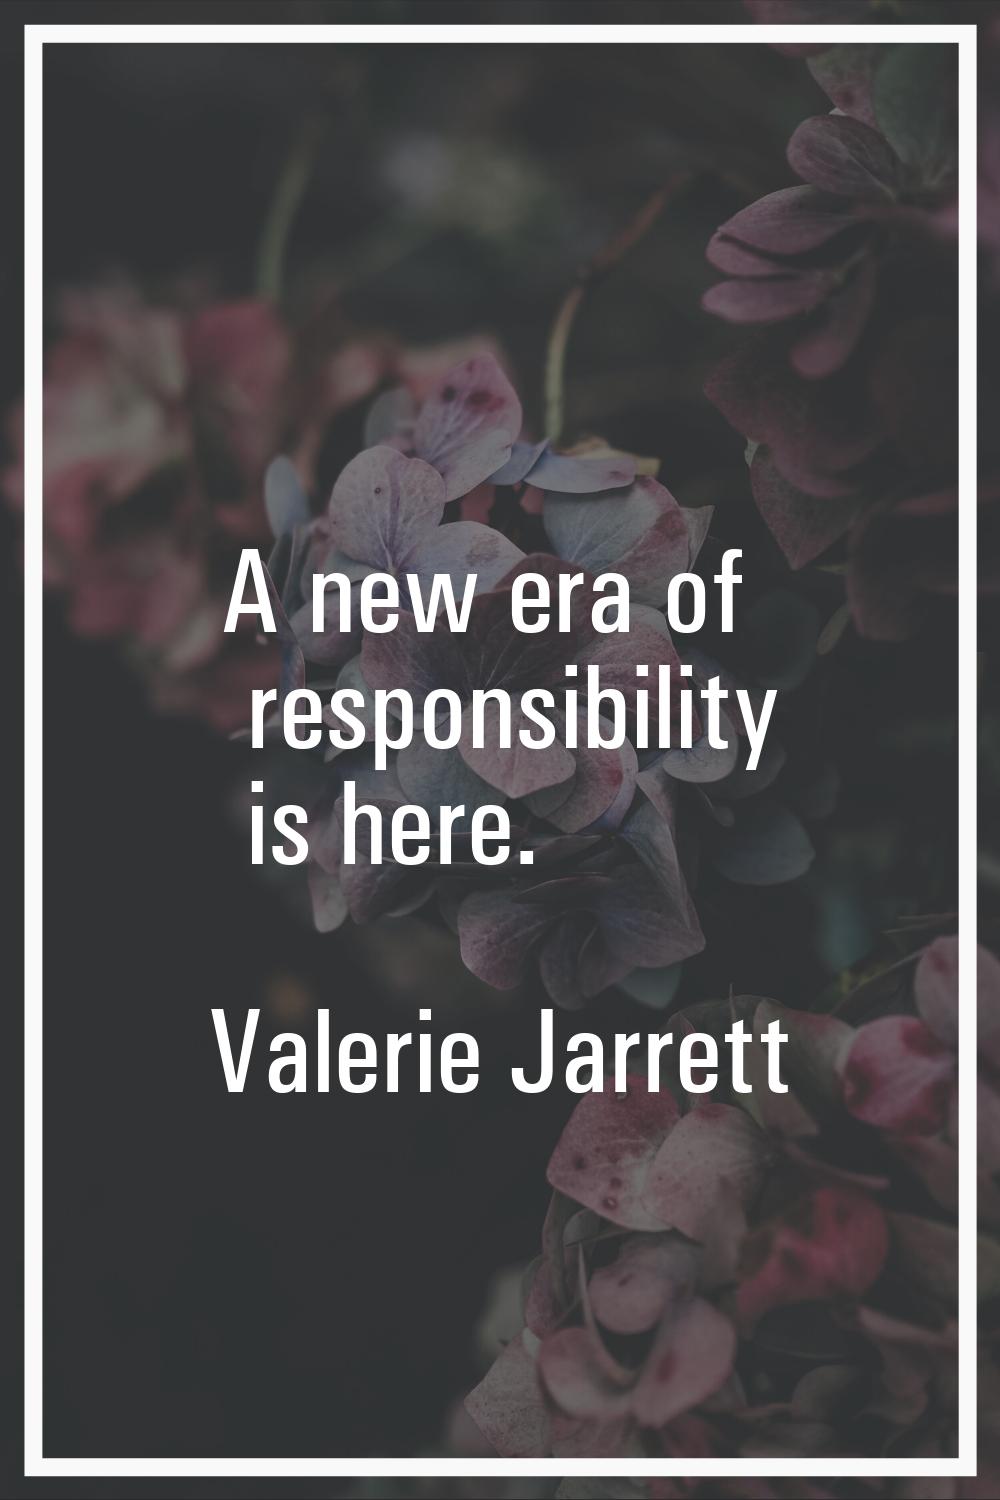 A new era of responsibility is here.